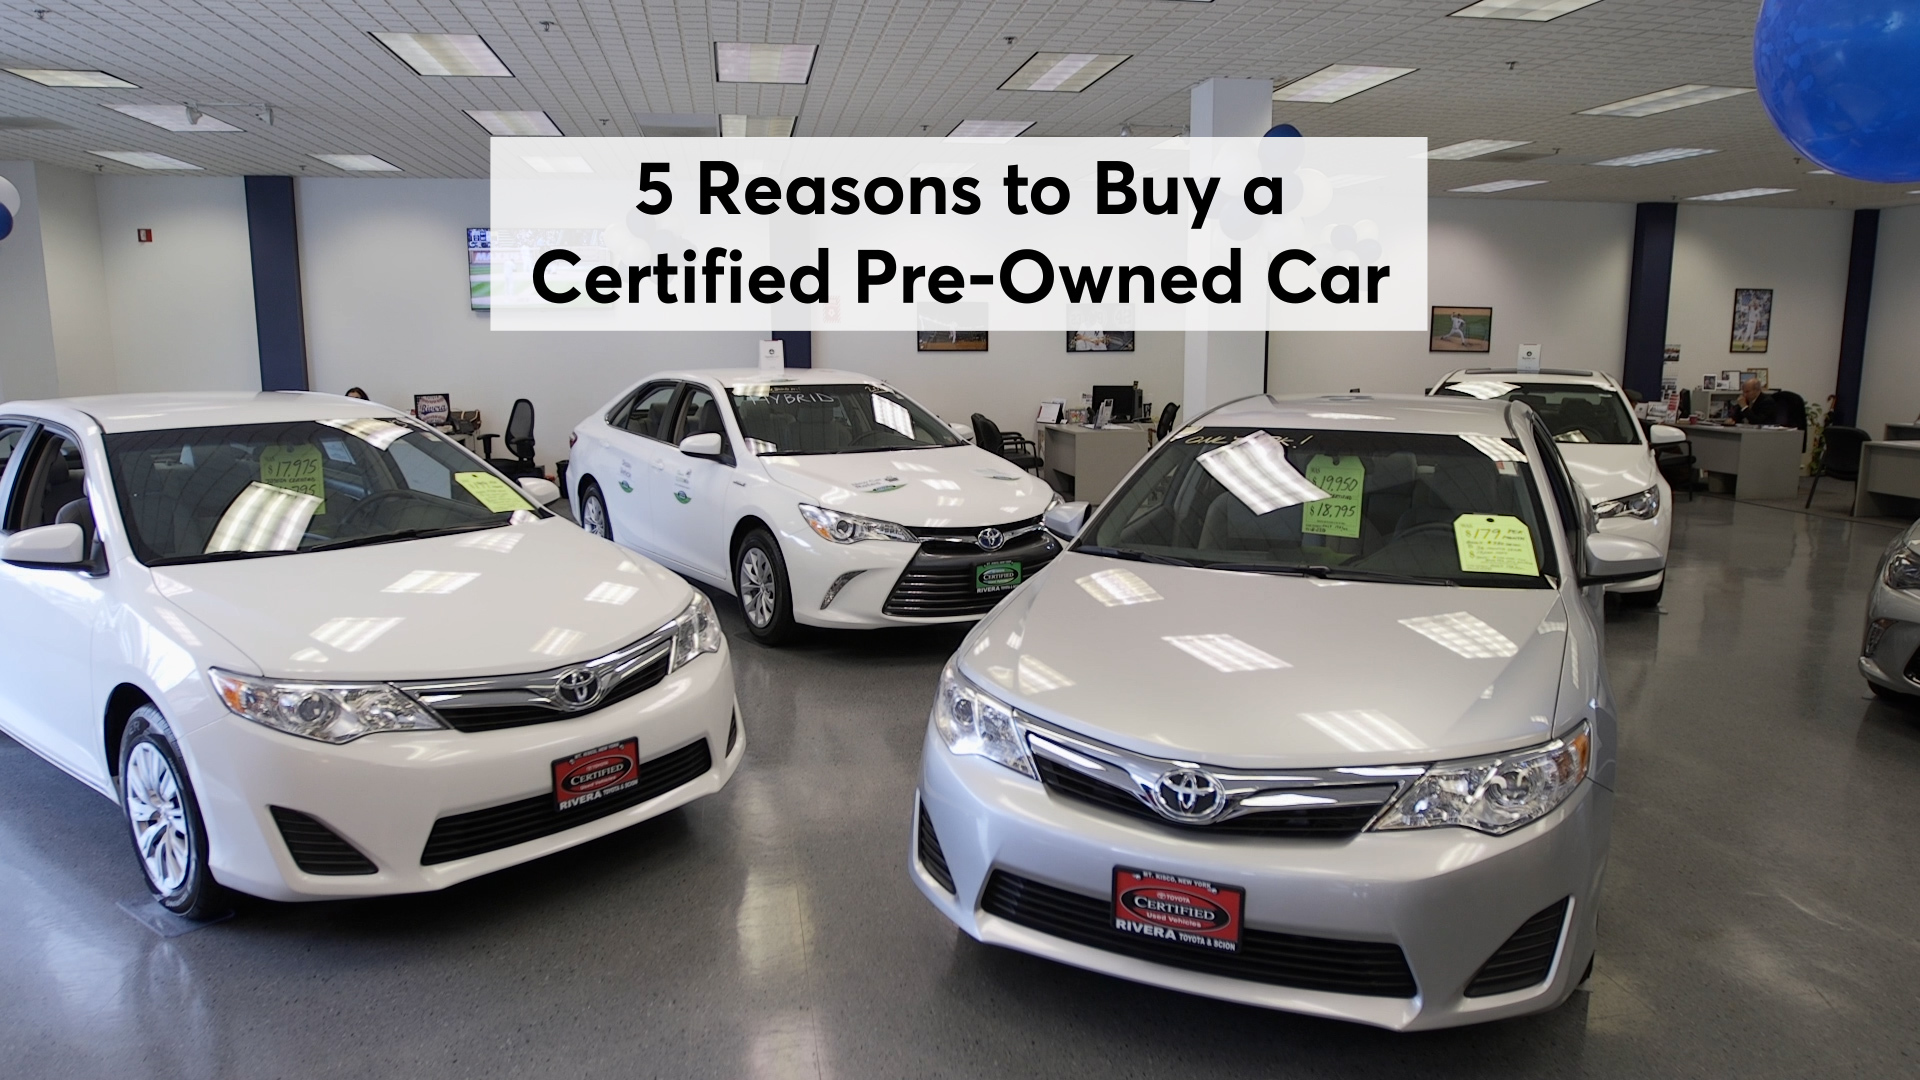 Buying Used vs. Certified Pre-Owned Vehicles - Kelley Blue Book